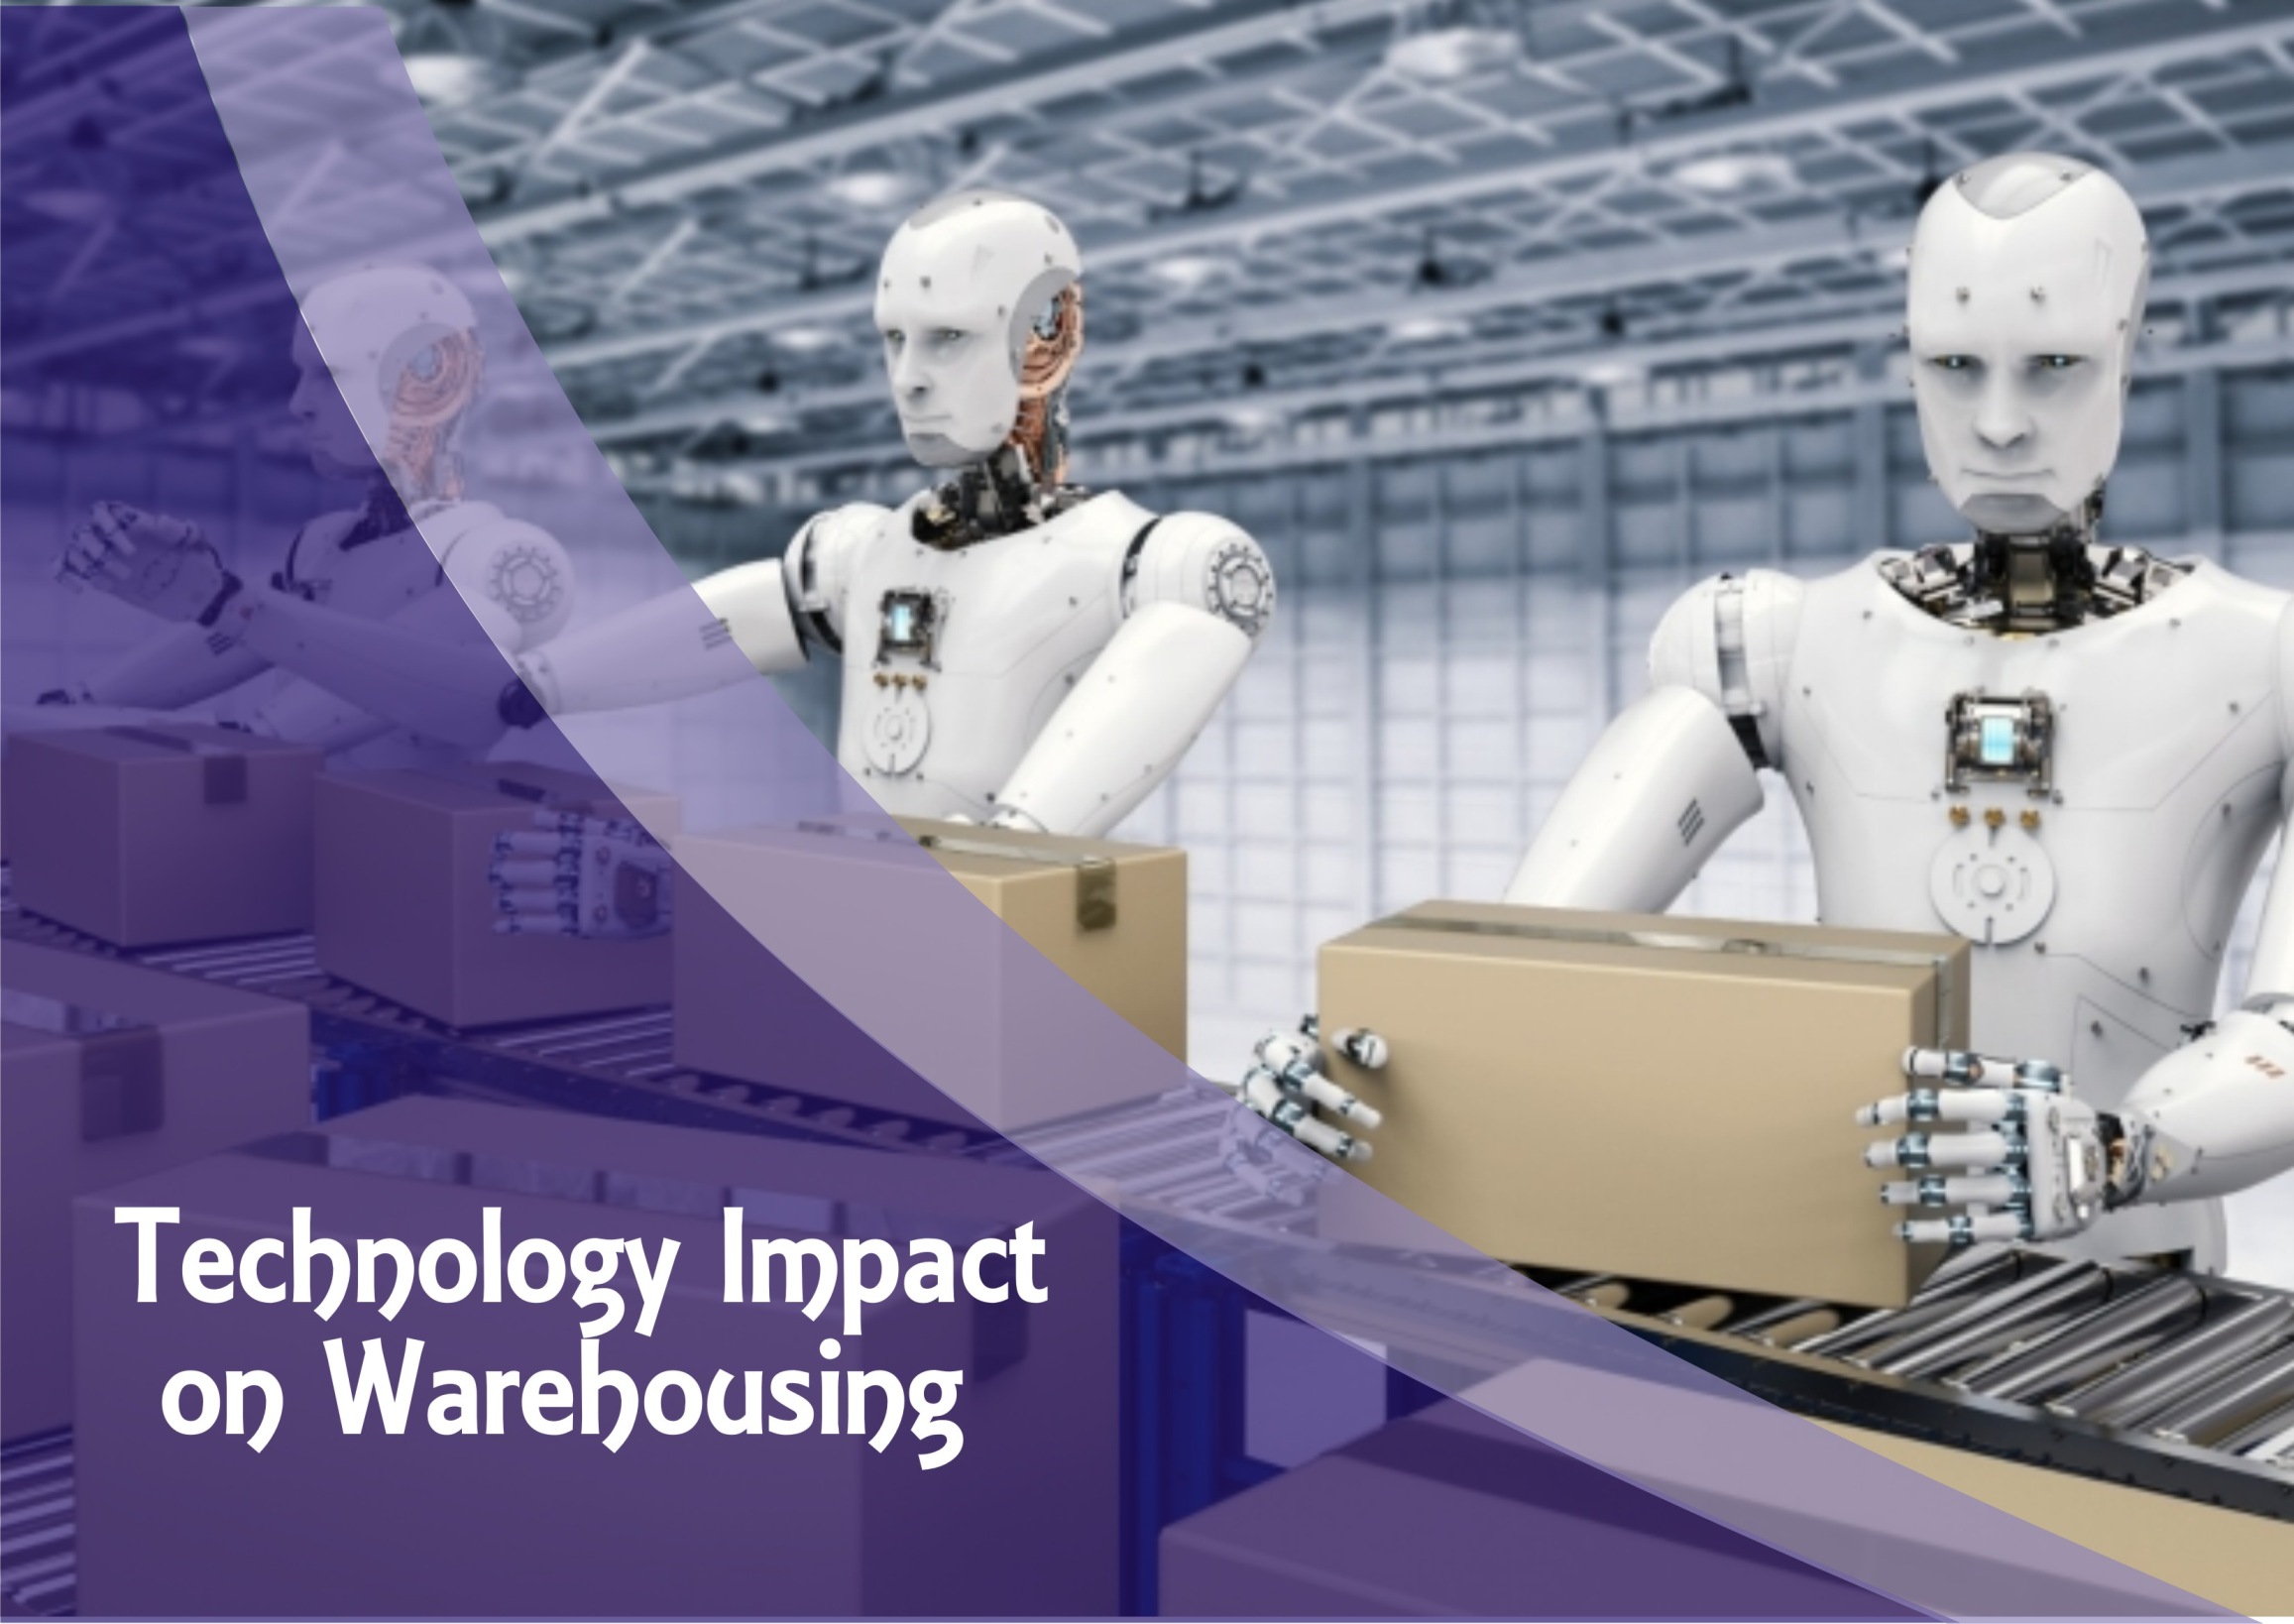 Ways in which Logistics technology is impacting warehousing